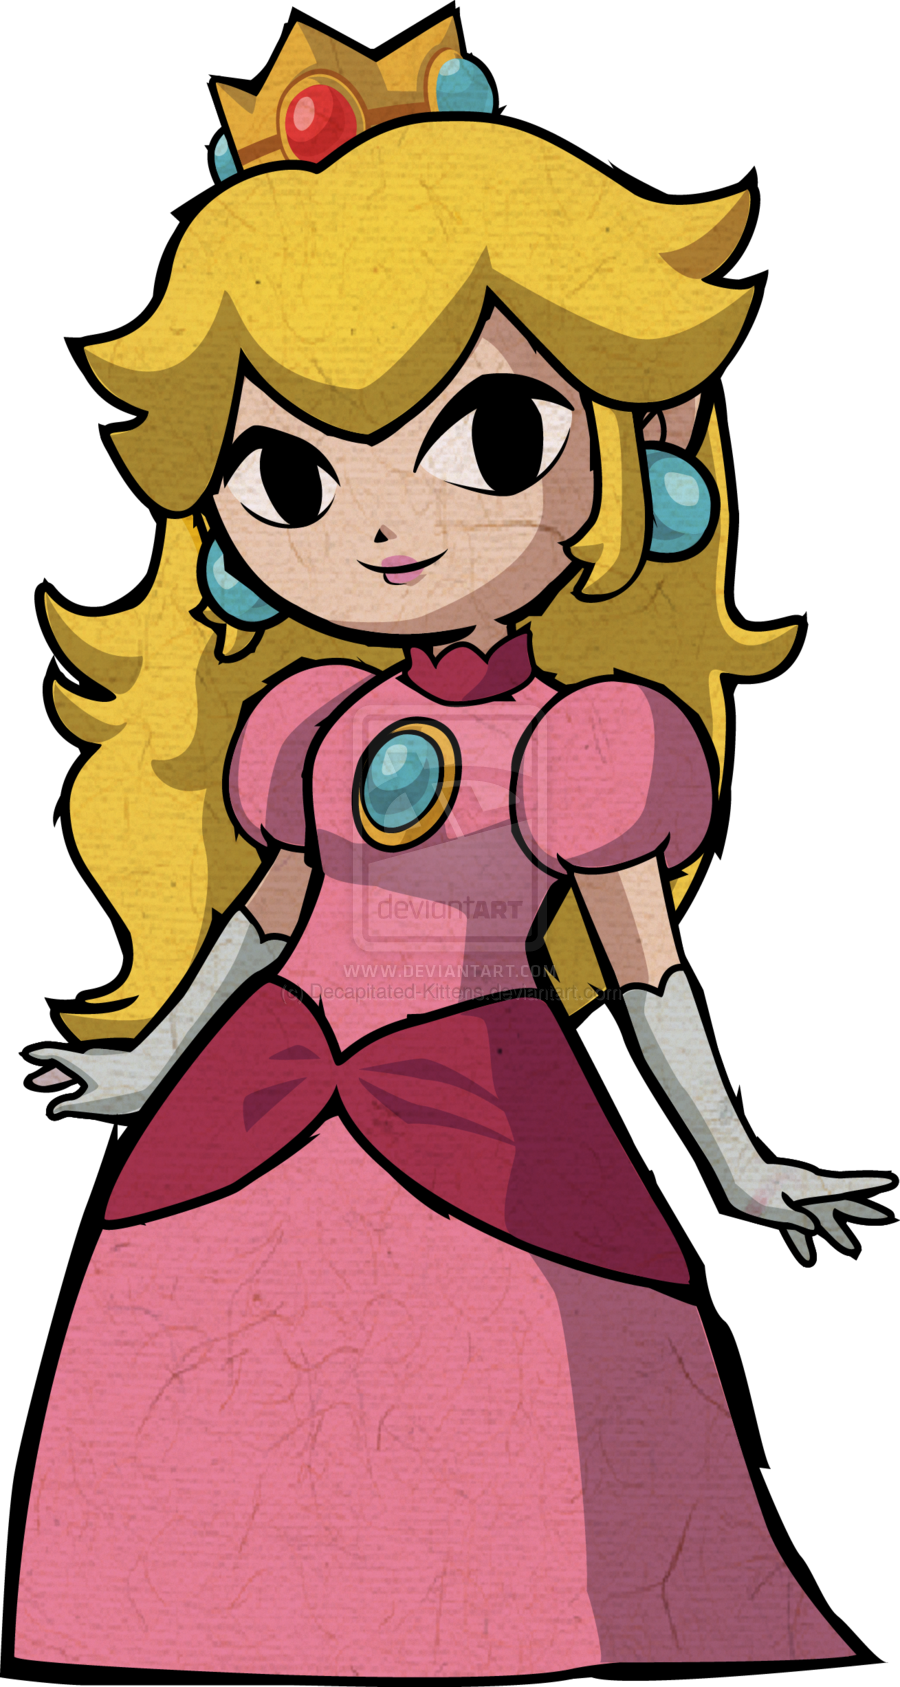 Princess Peach Drawn In The Wind Waker Style - Princess Zelda The Wind Waker (900x1687)